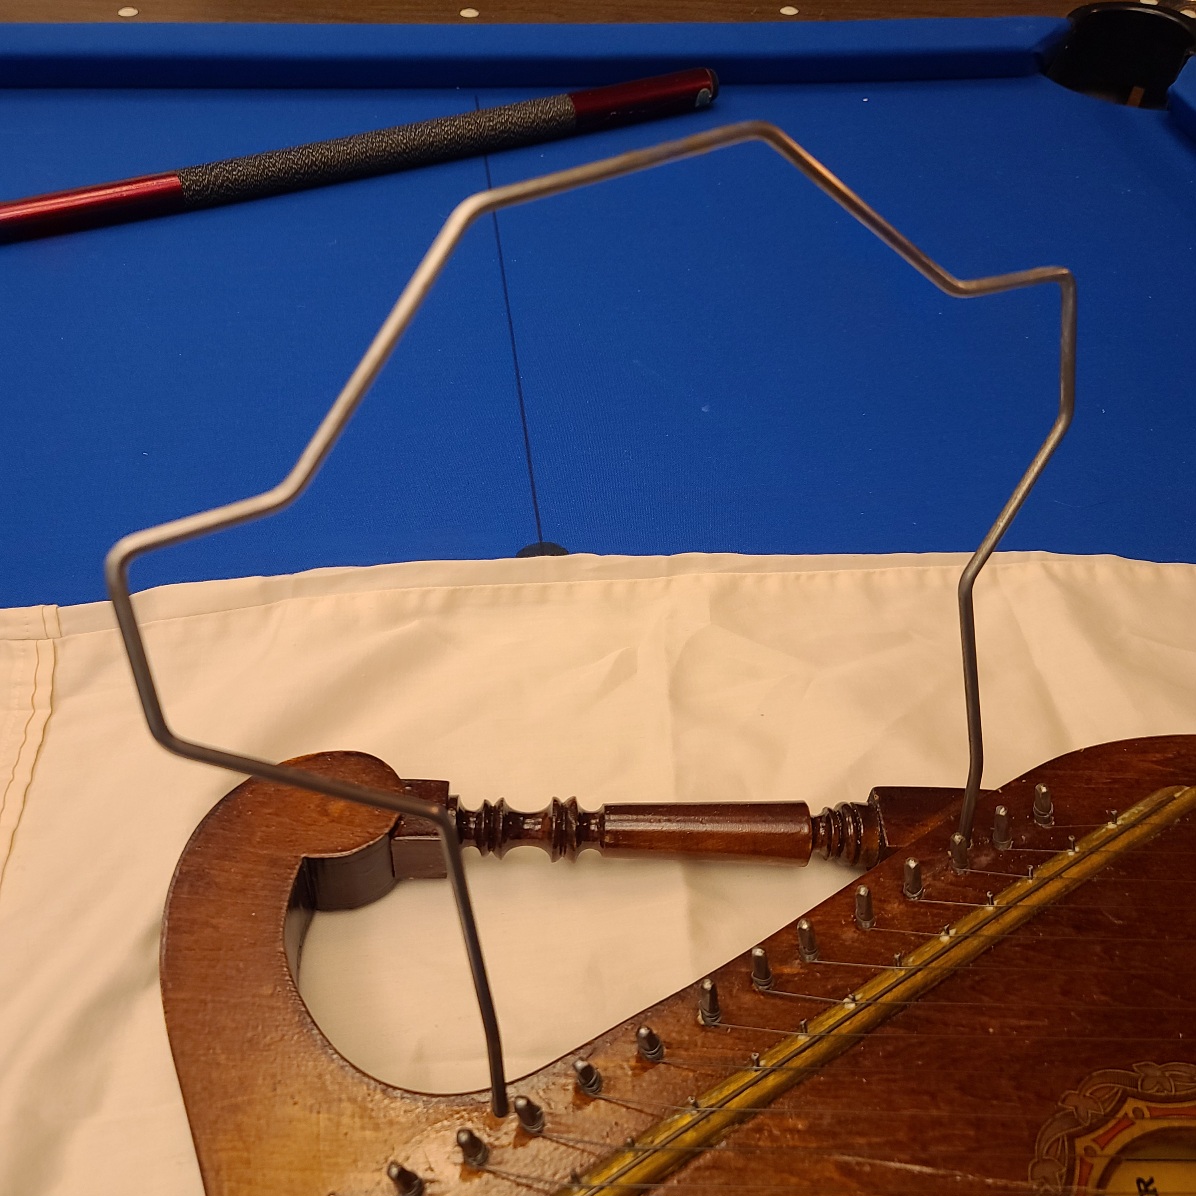 Mounted on my zither